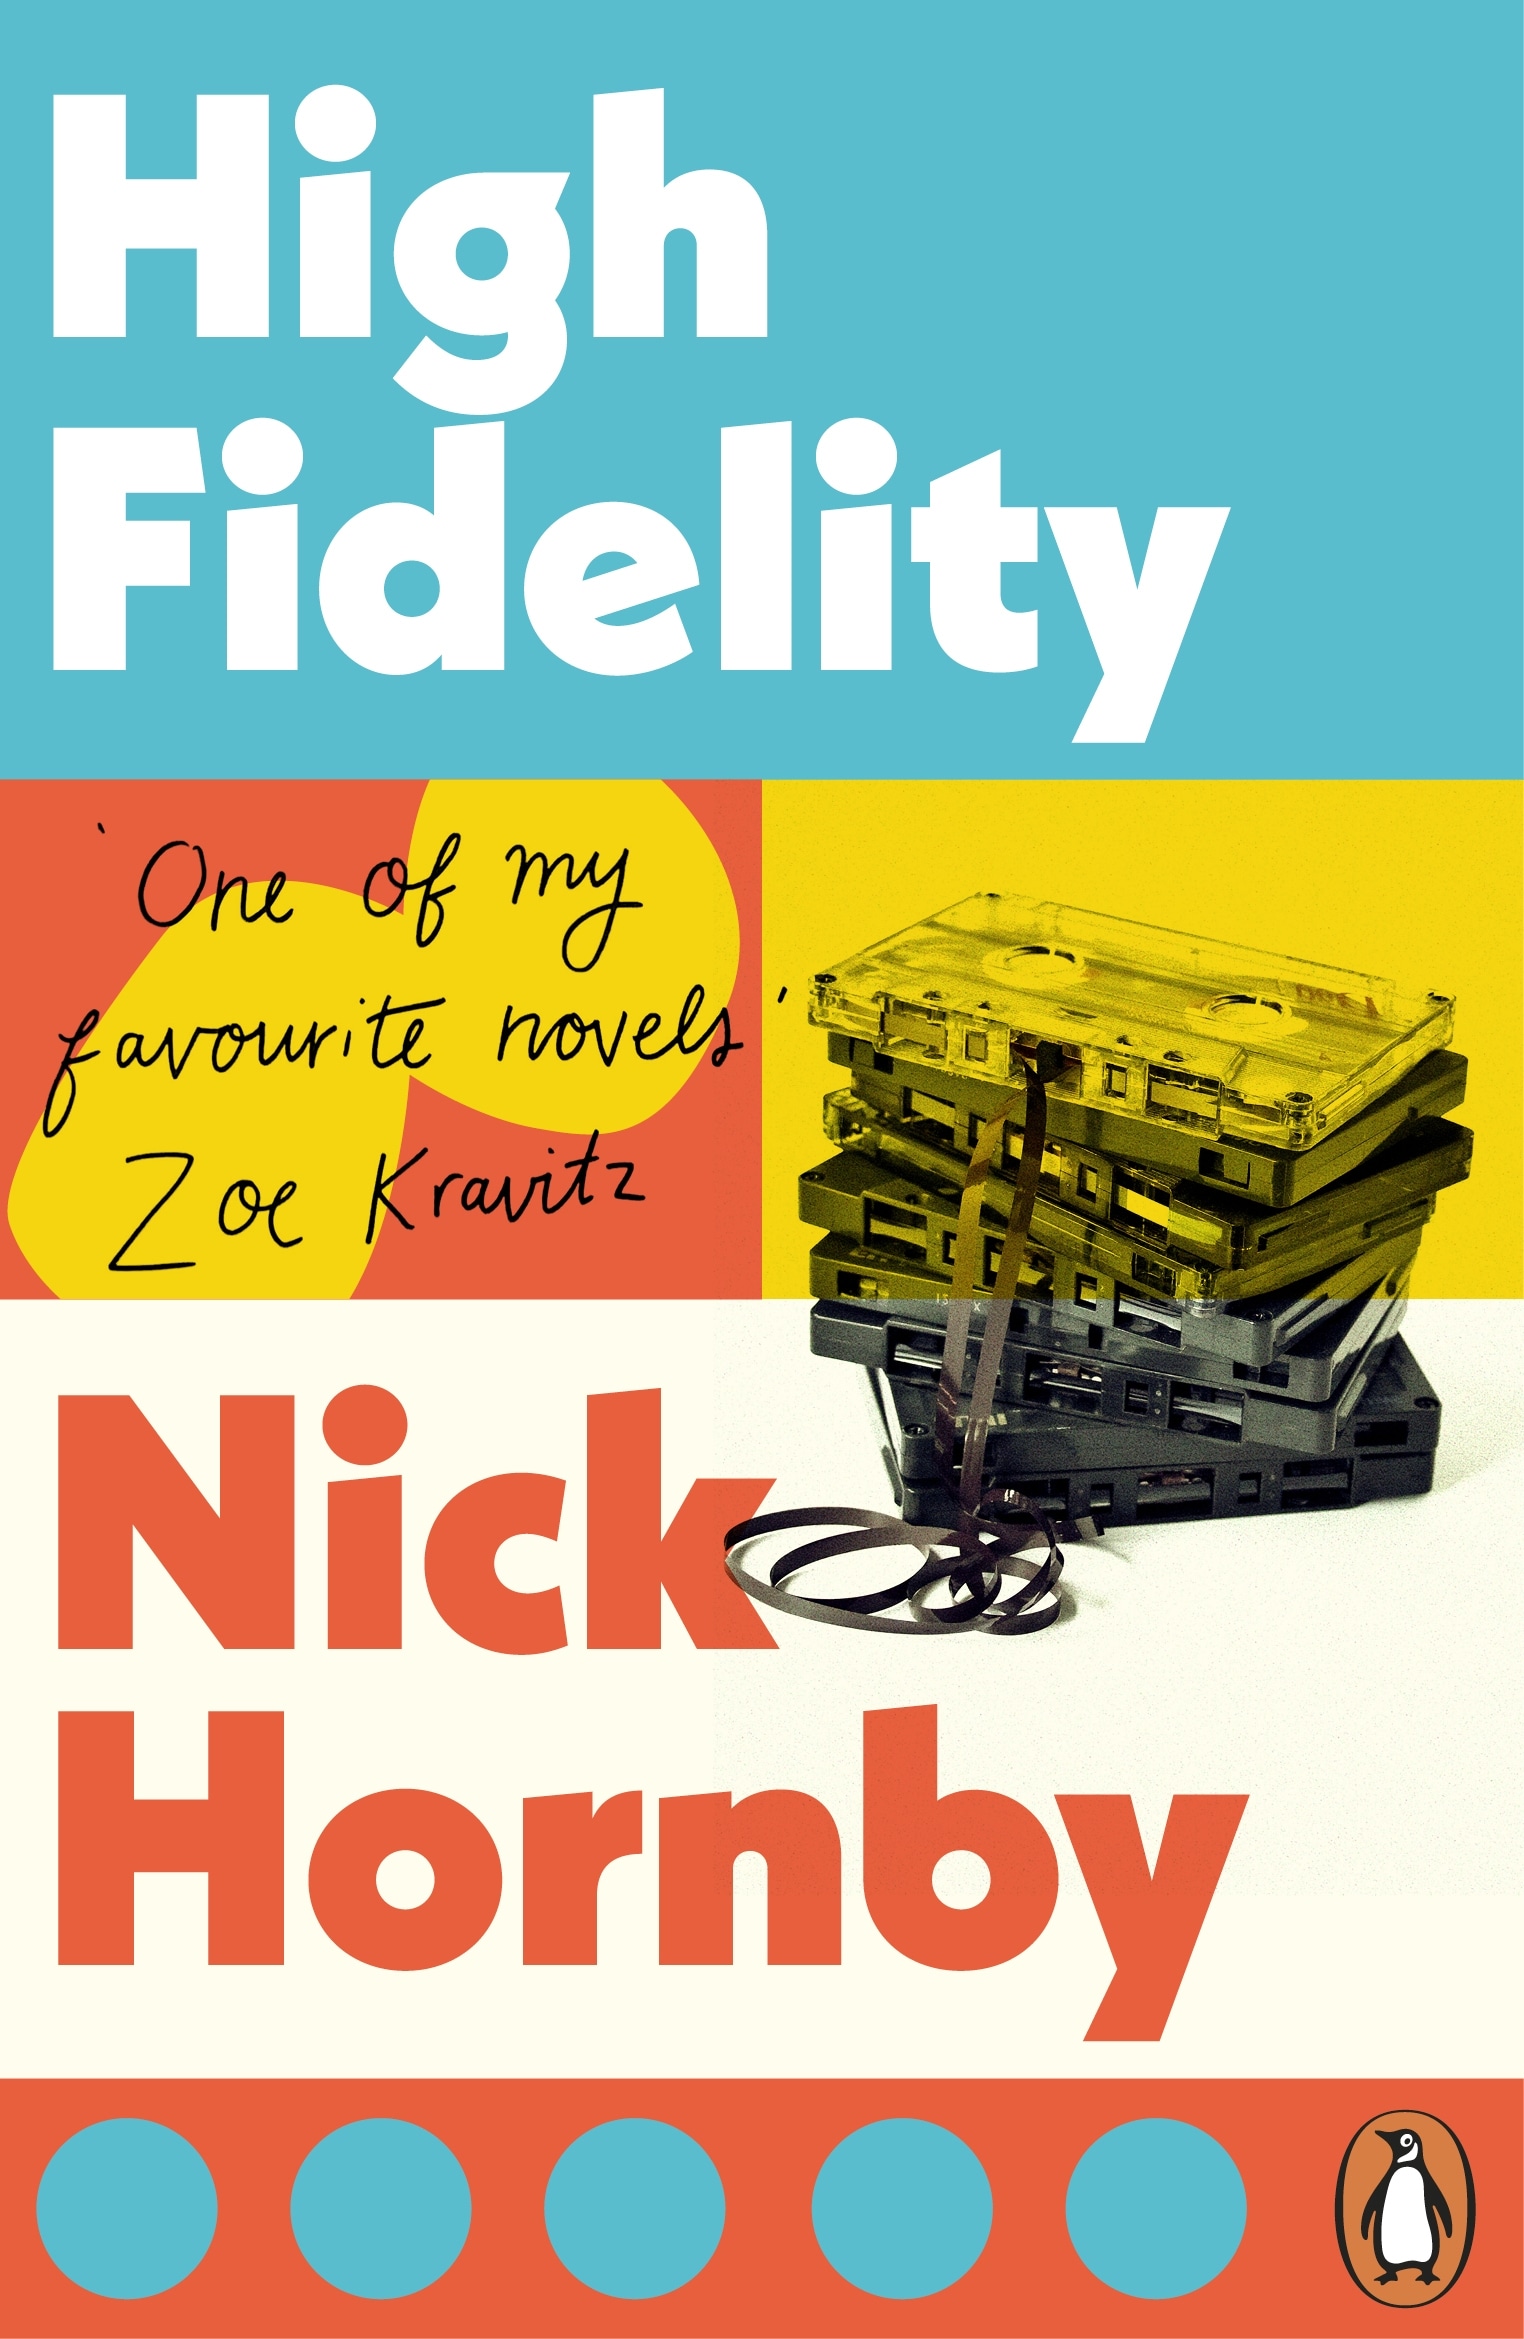 Book “High Fidelity” by Nick Hornby — January 2, 2014